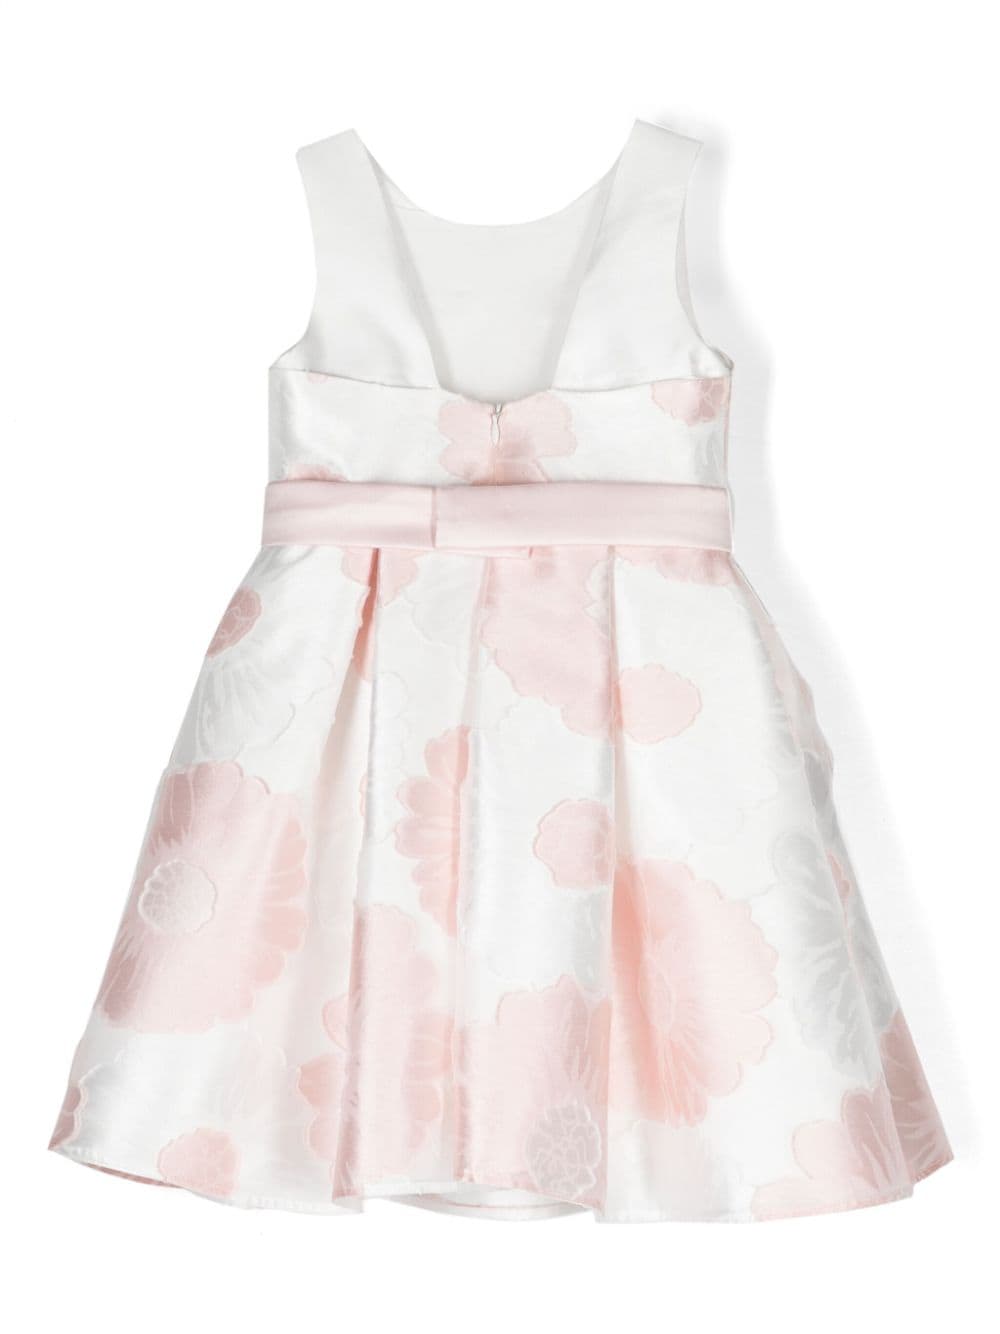 White and pink satin dress for girls